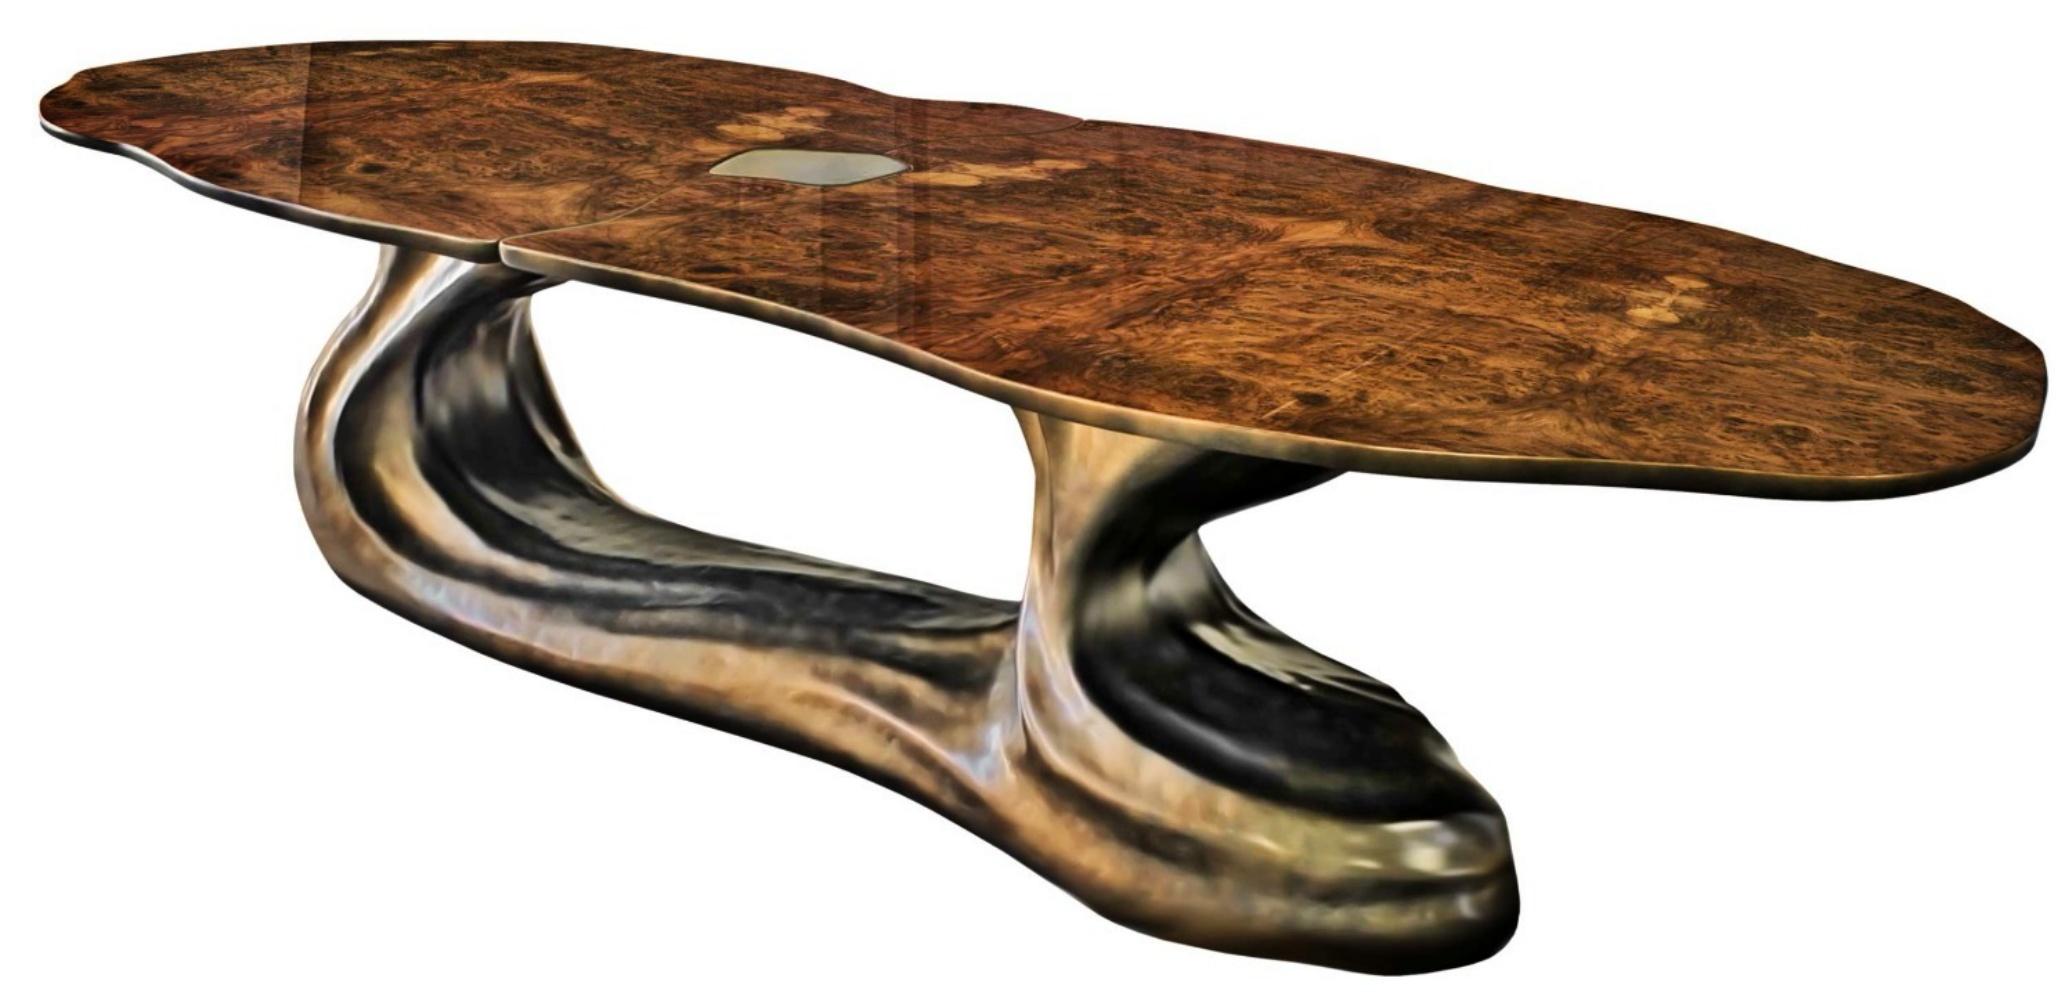 Modern New Design Dining Table in Walnut Veneer for 10/12 Persons Ready Delivery Now For Sale